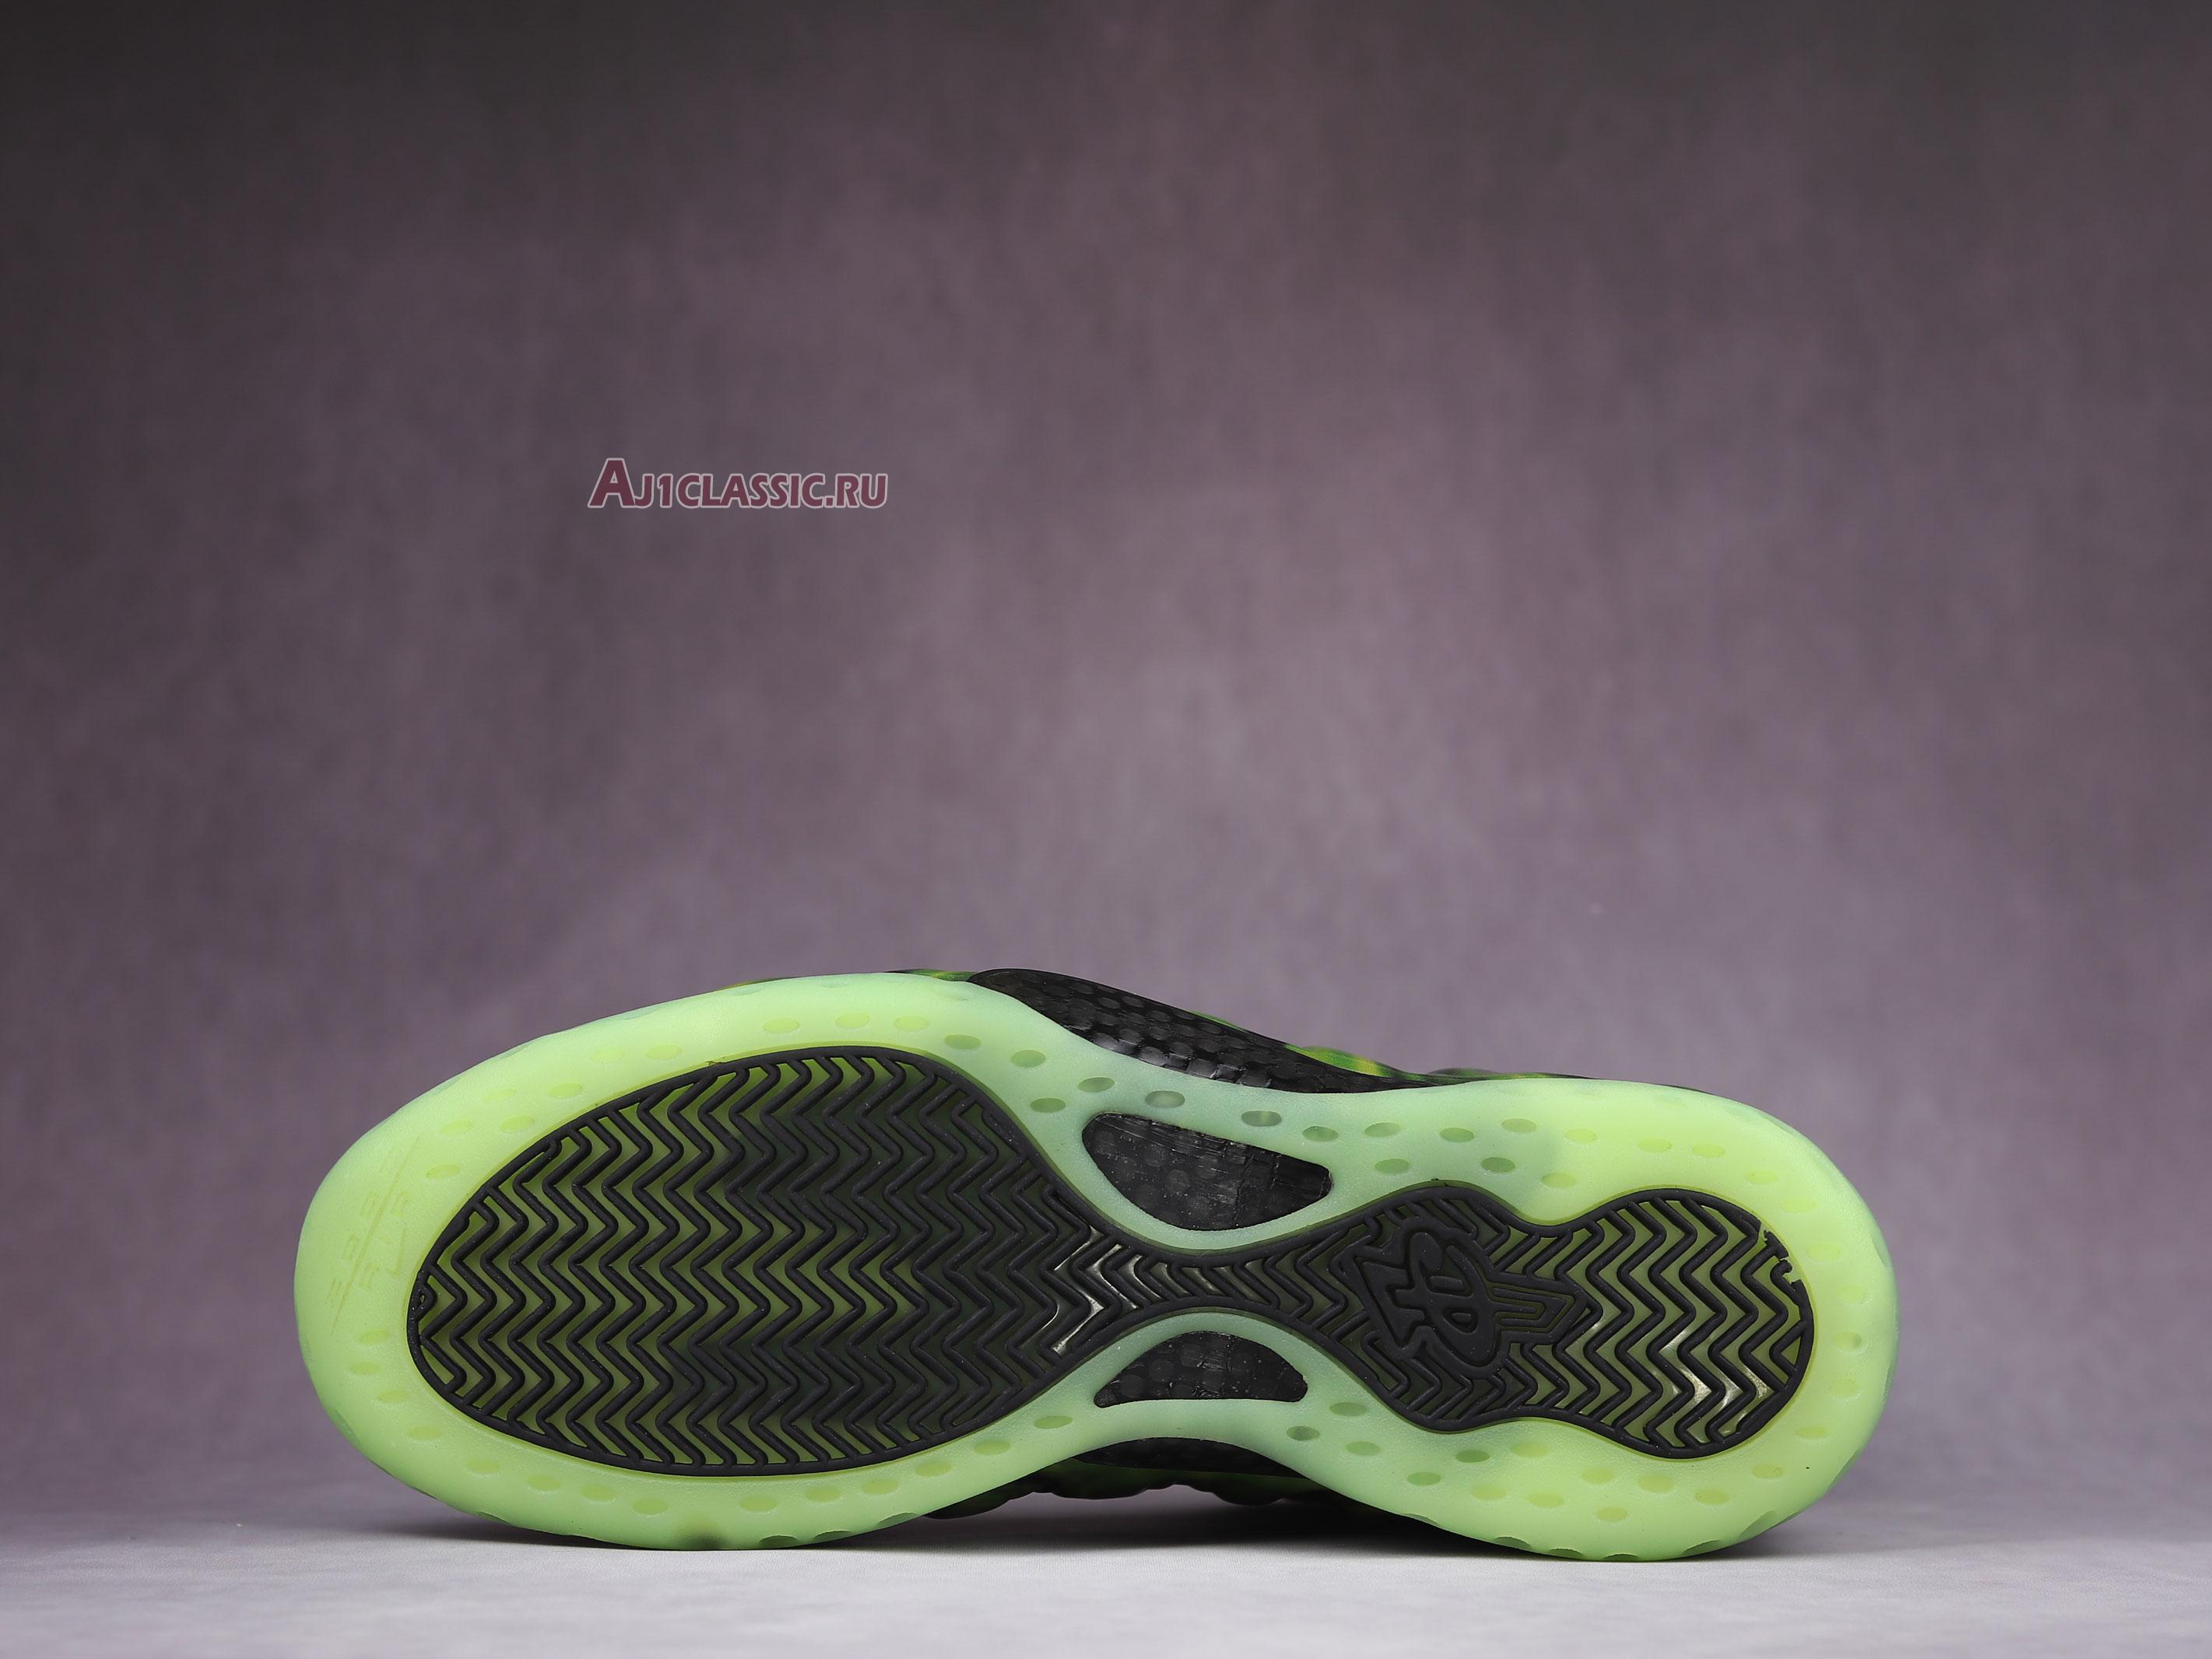 Nike Air Foamposite One "Paranorman" 579771-003